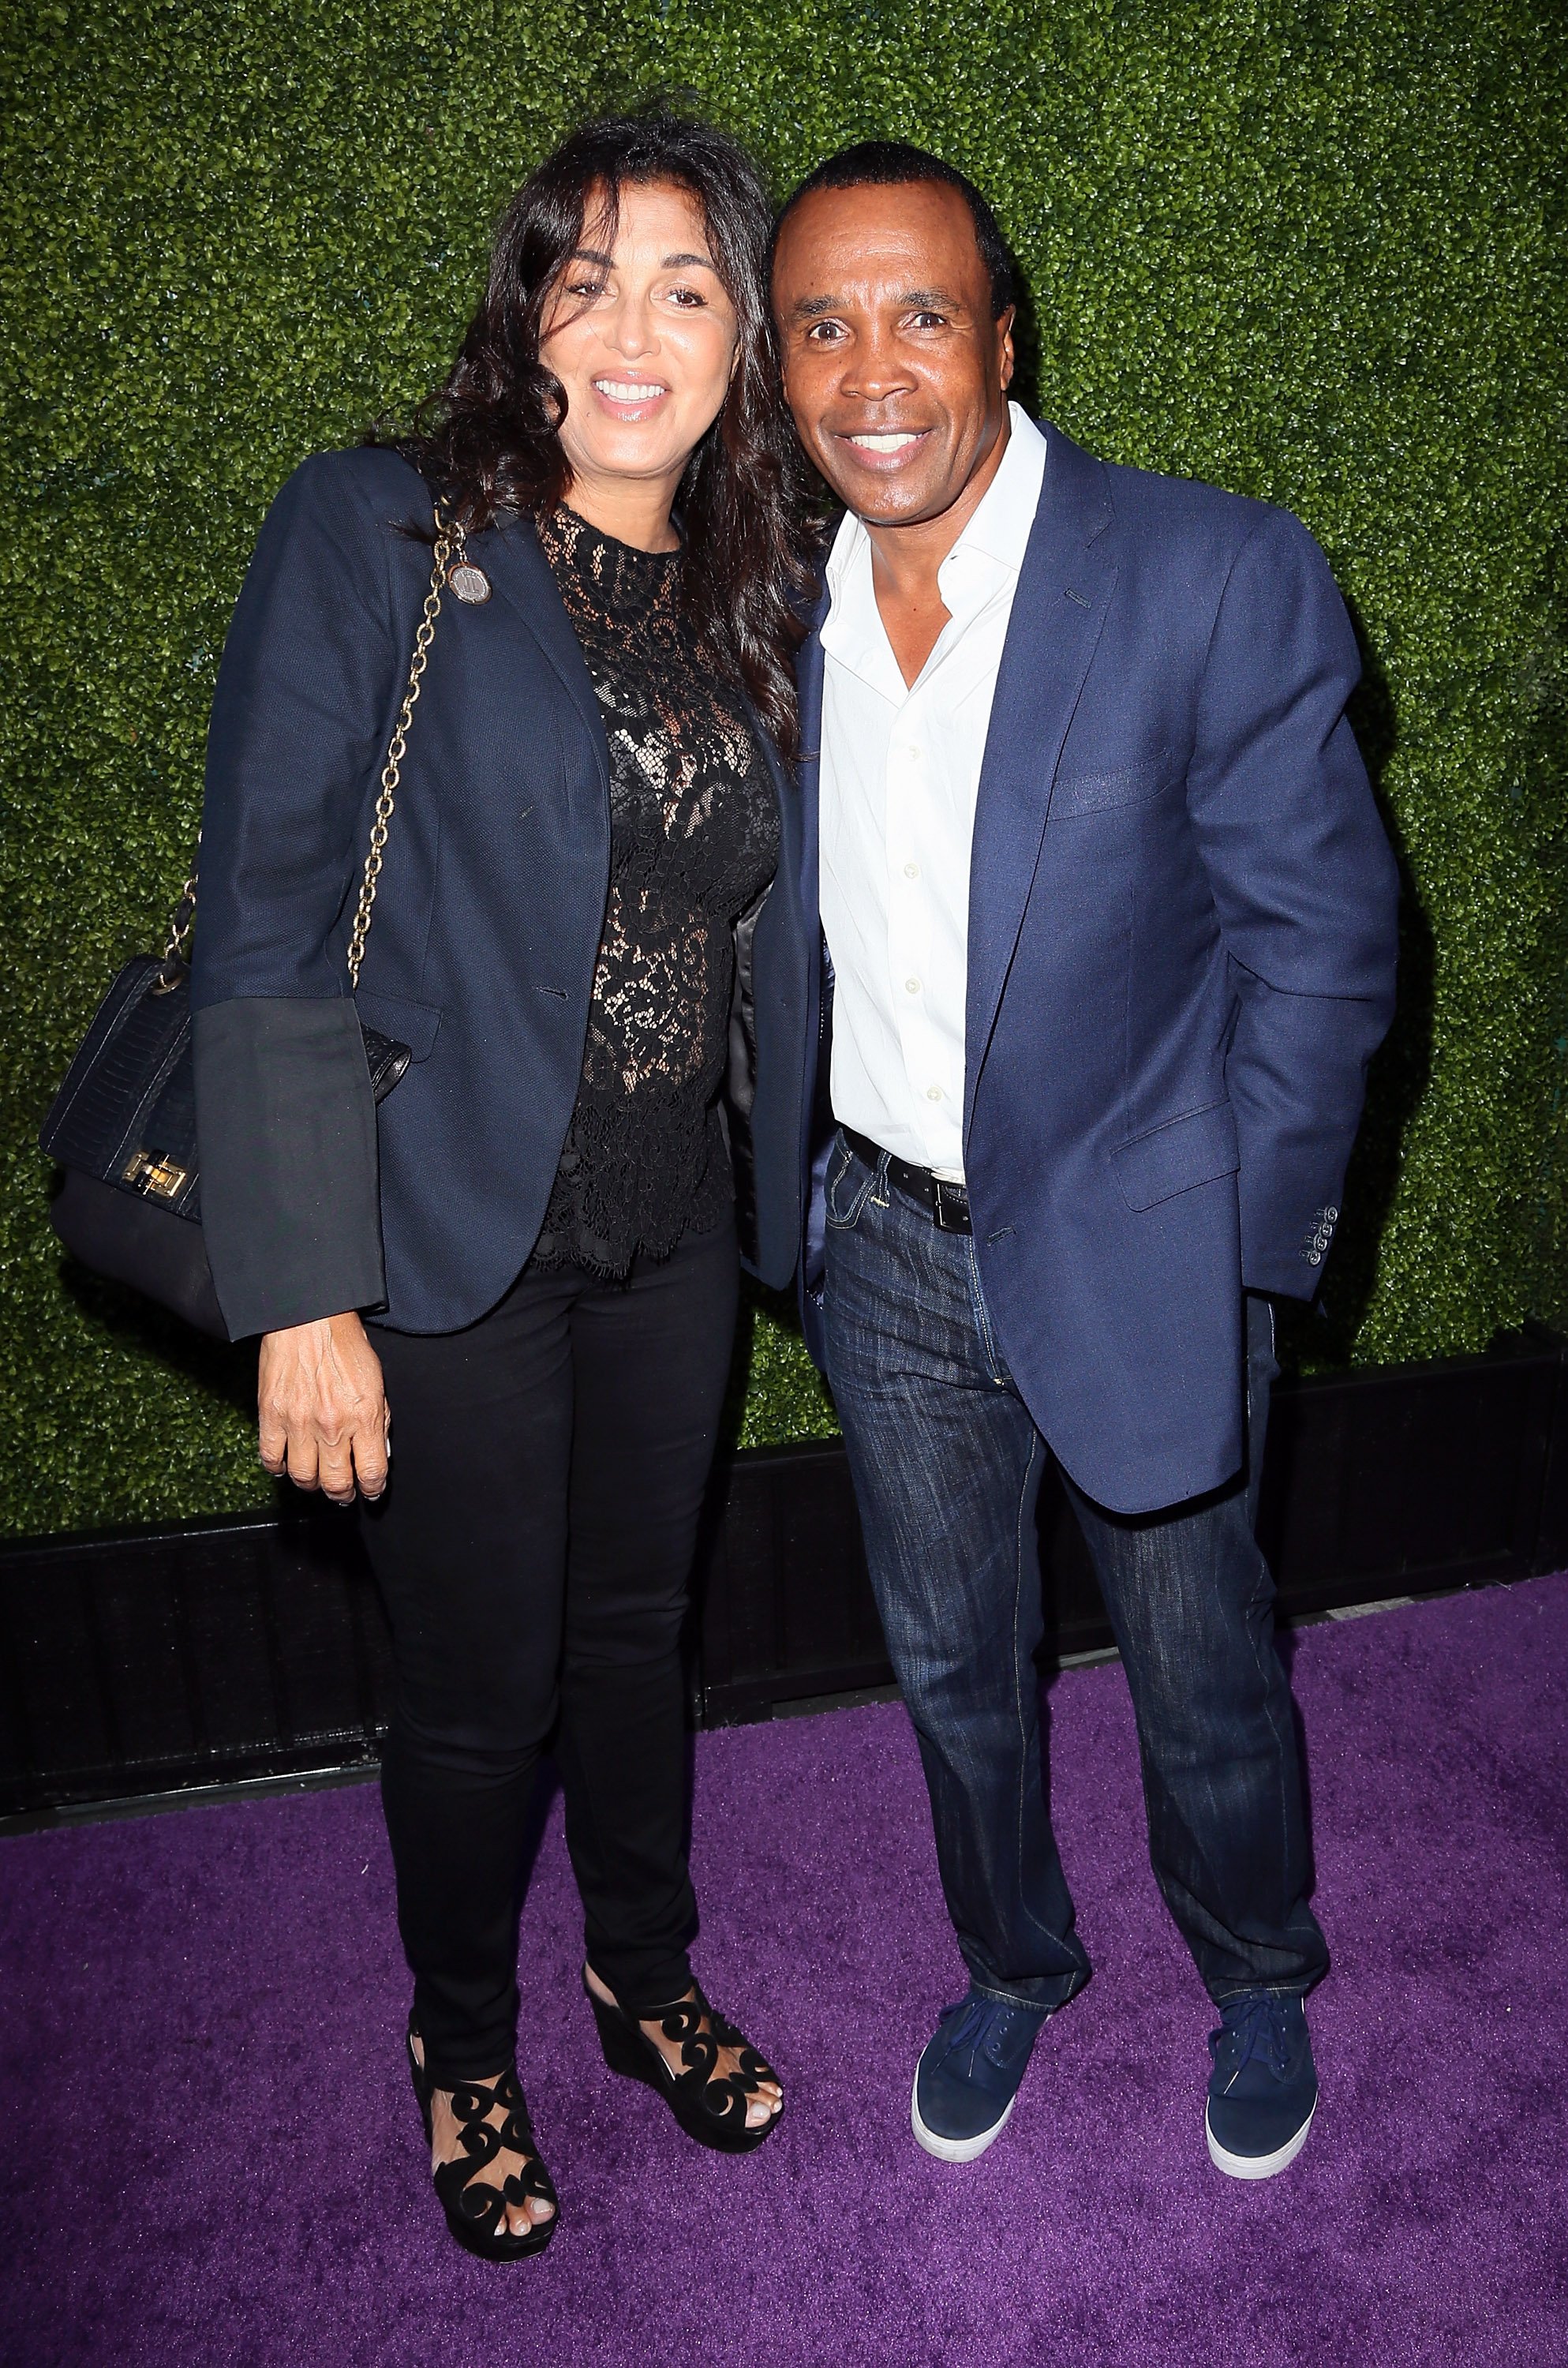 Sugar Ray Leonard and his wife Bernadette Robi in Los Angeles 2014. | Source: Getty Images 